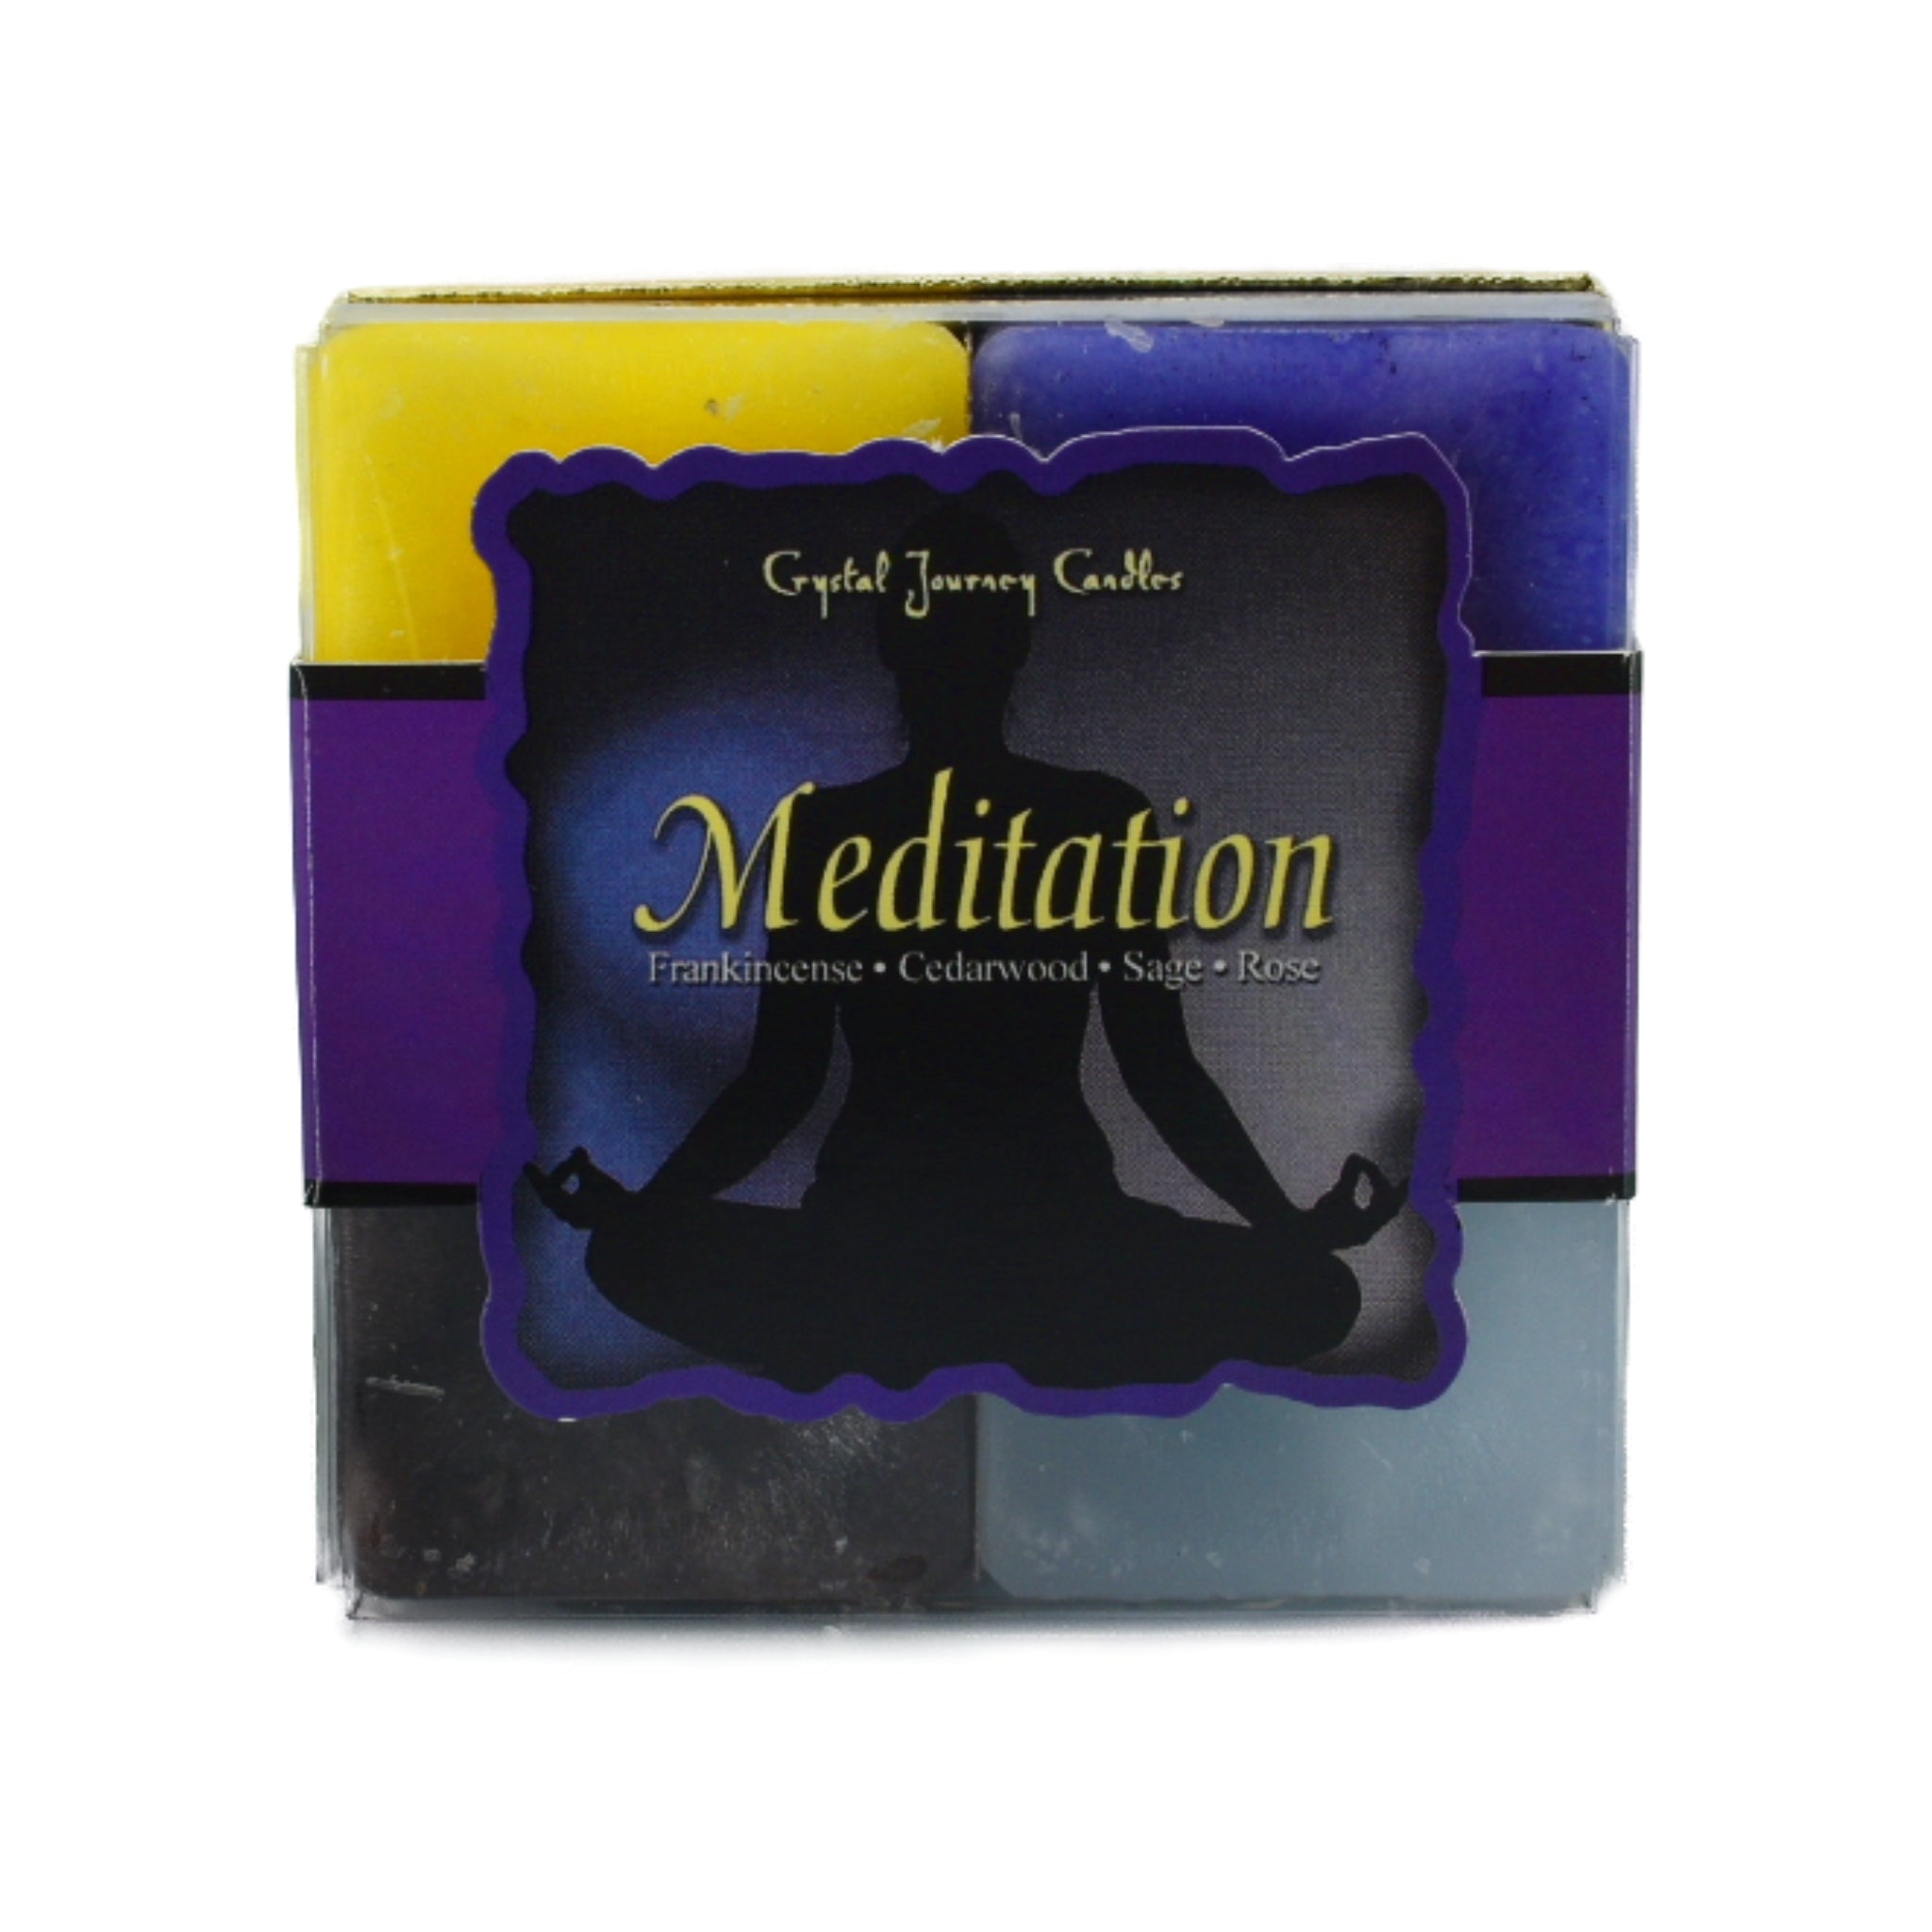 Meditation Square Pack Candle.  A set of four candles uniquely created to help you reach your inner space whenever you need to reflect on life&